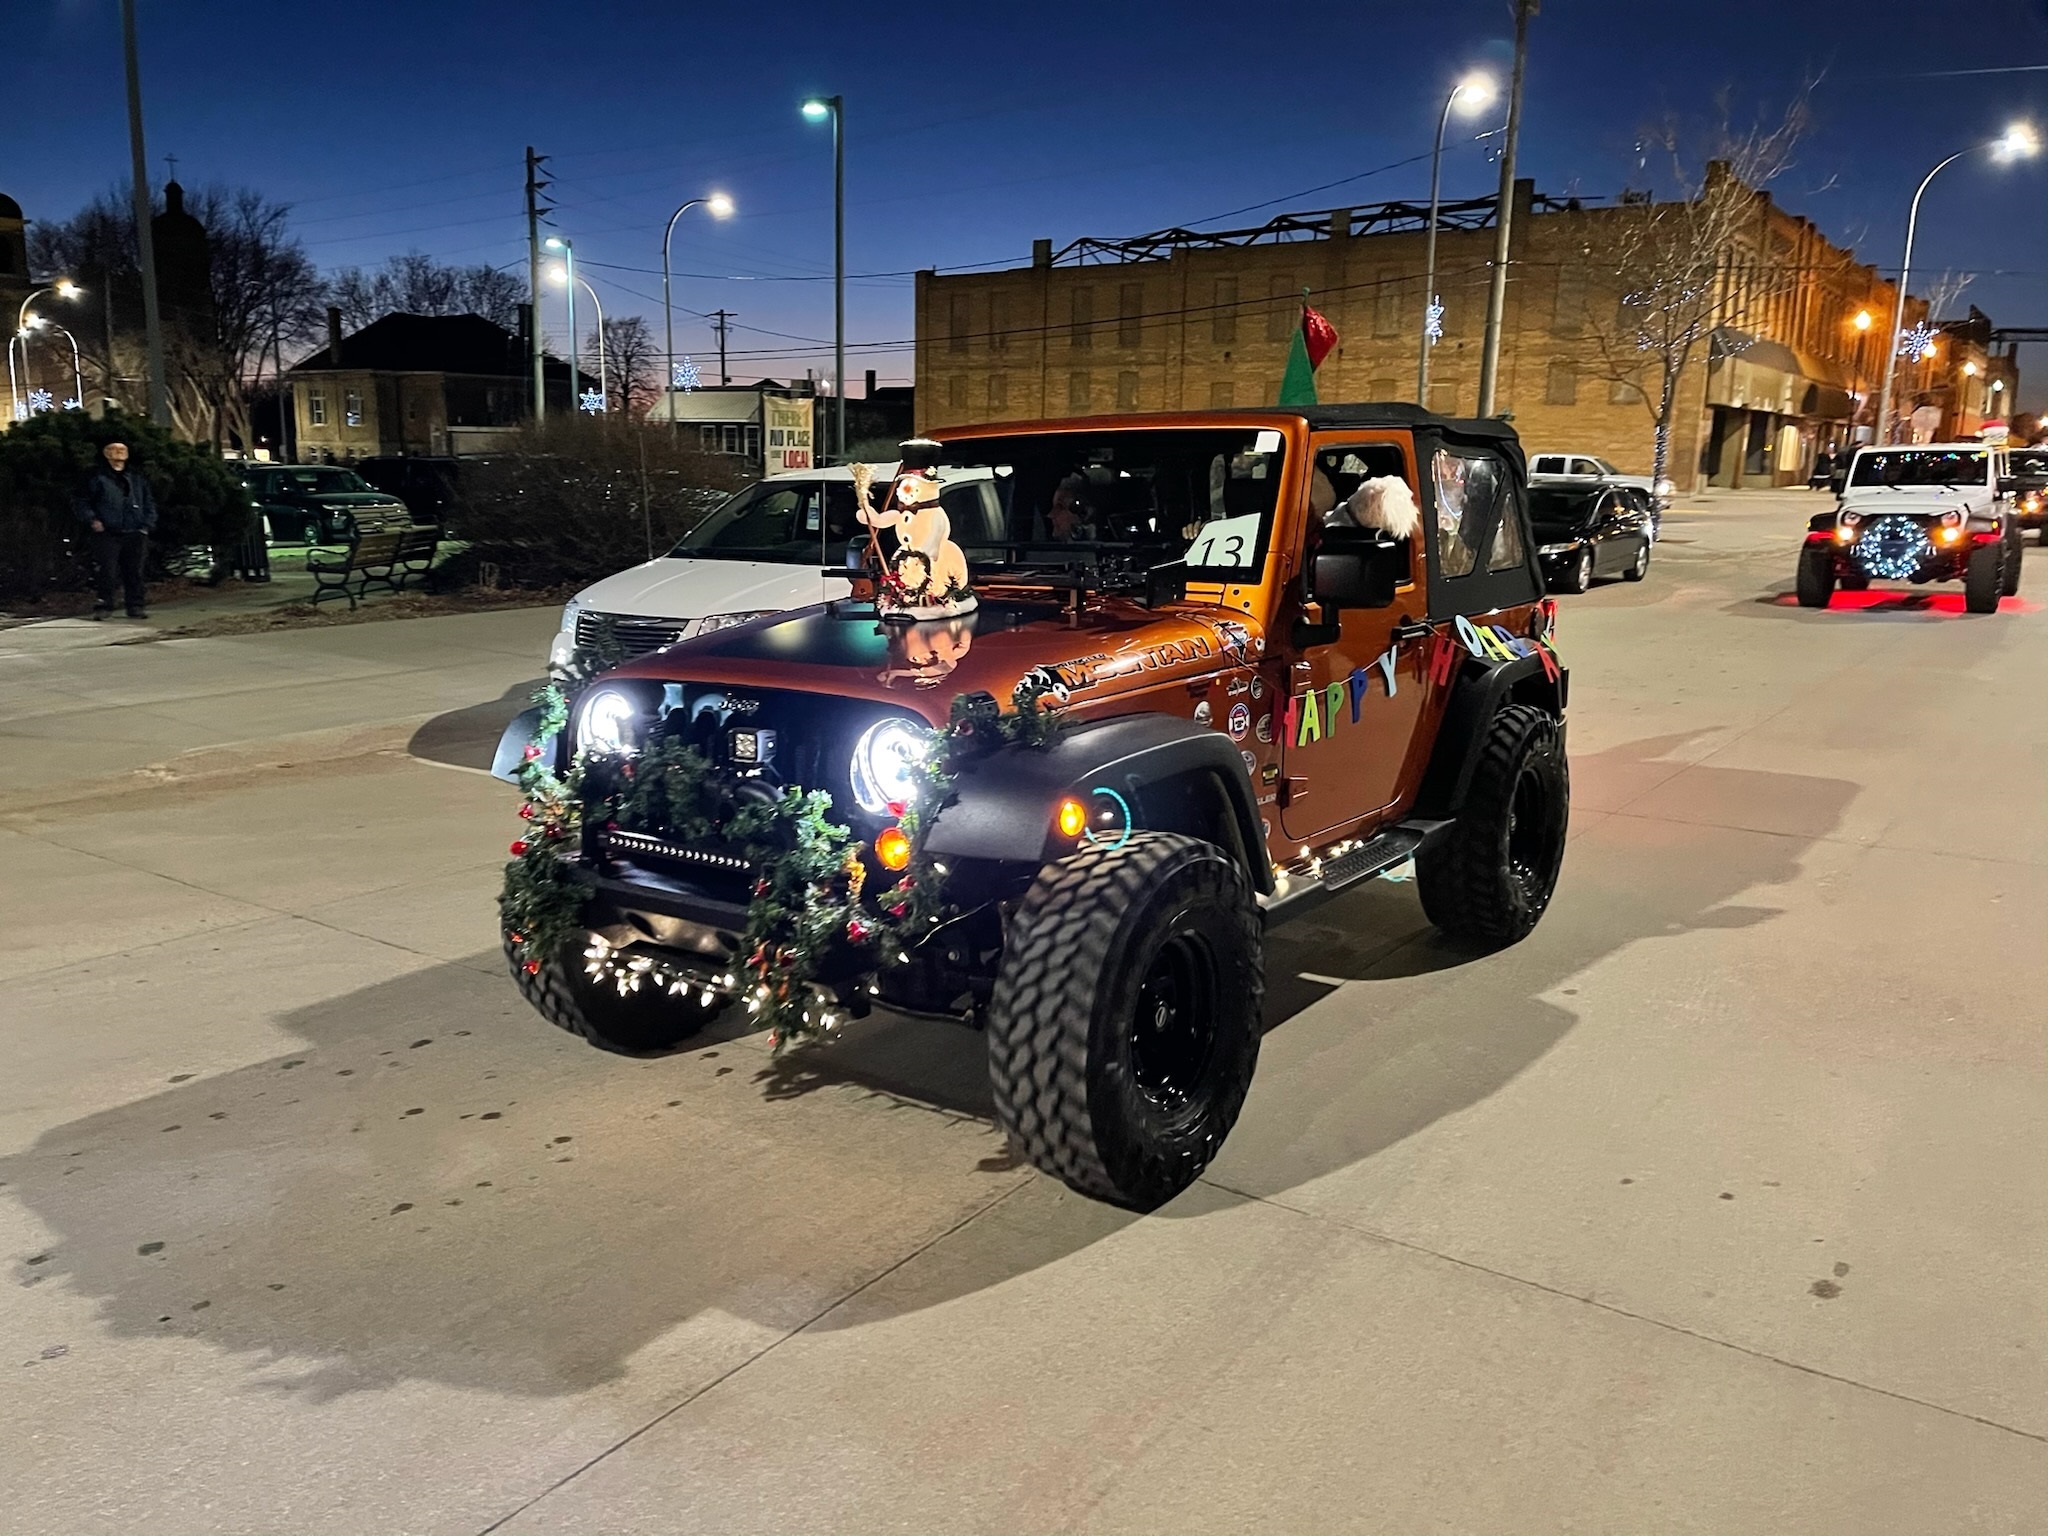 Entry Deadline For Holiday Parade Of Lights & Jeep Parade Is November